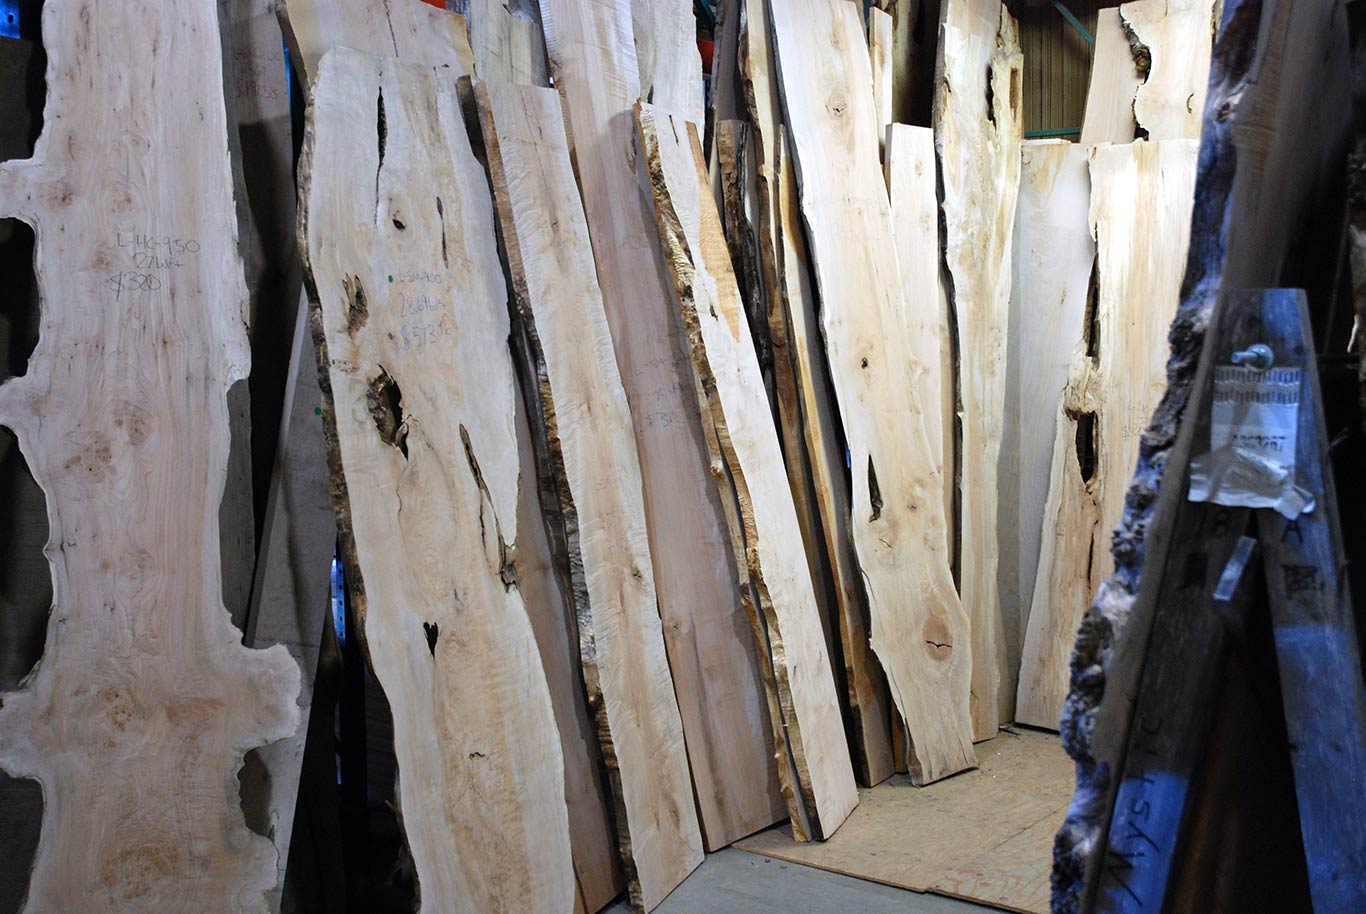 Live Edge Slabs at The Hardwood Centre in Corvallis and Albany, Oregon